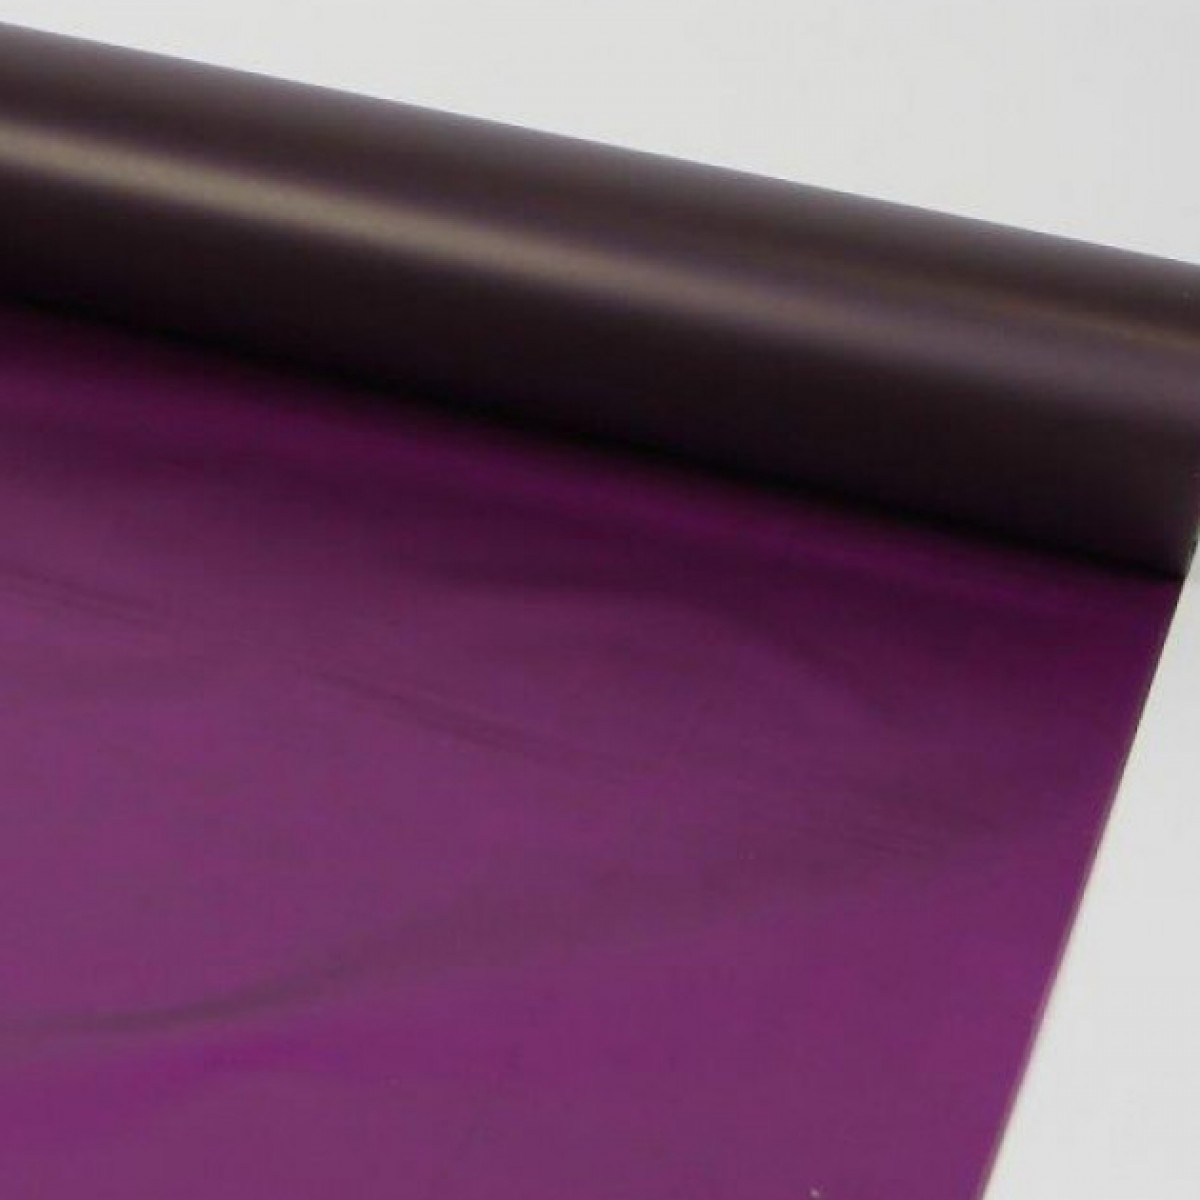 7047 Frosted Purple 80cmx25m 50mic Film - 1 Roll